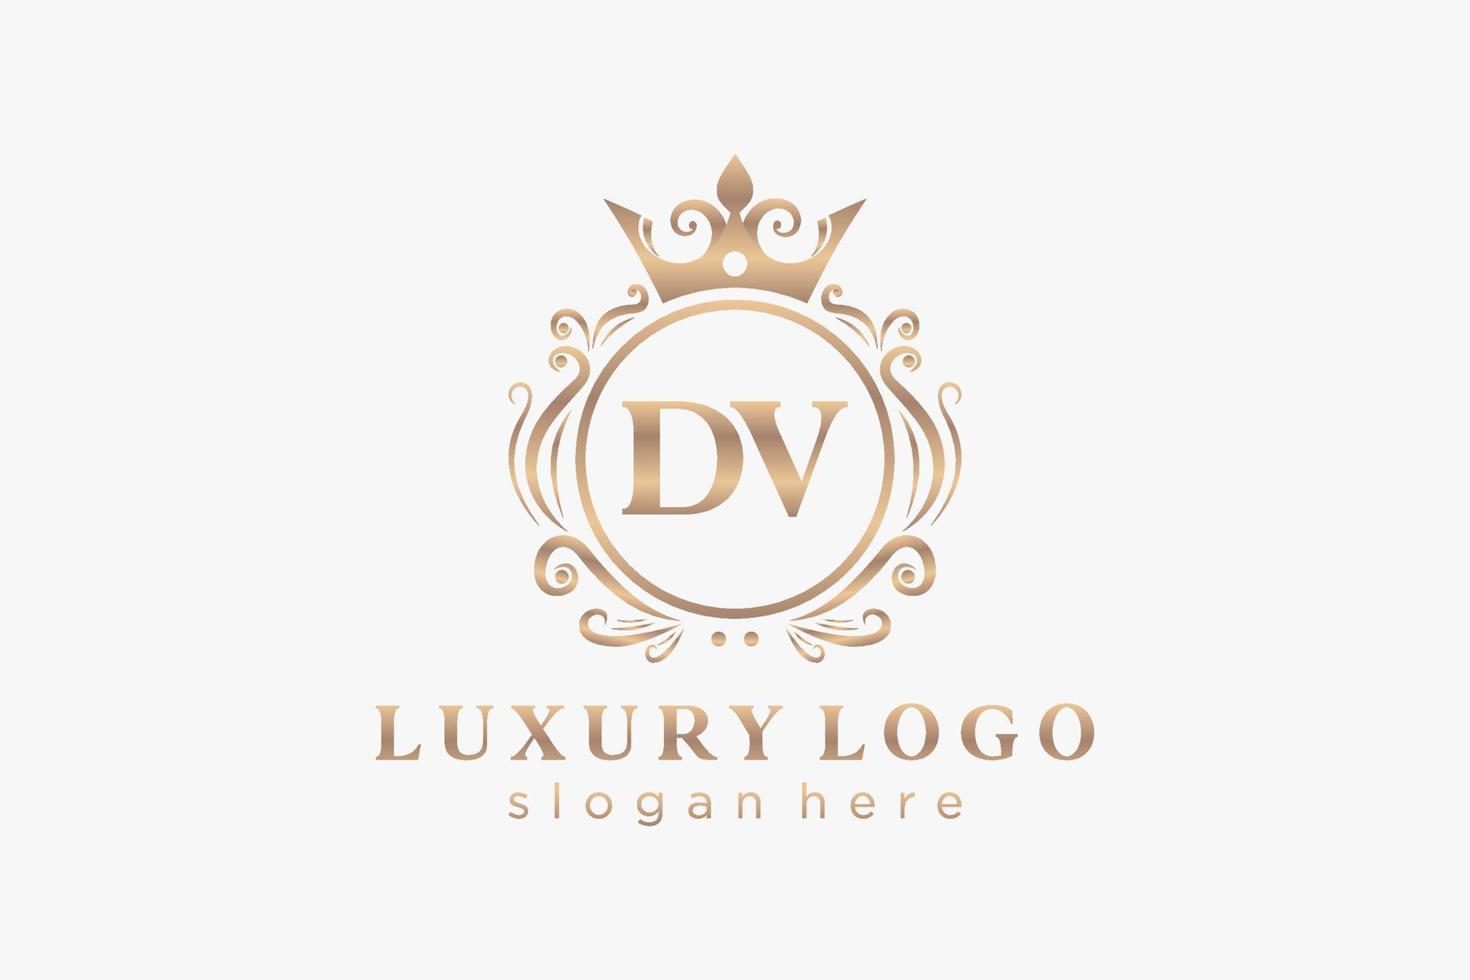 Initial DV Letter Royal Luxury Logo template in vector art for Restaurant, Royalty, Boutique, Cafe, Hotel, Heraldic, Jewelry, Fashion and other vector illustration.